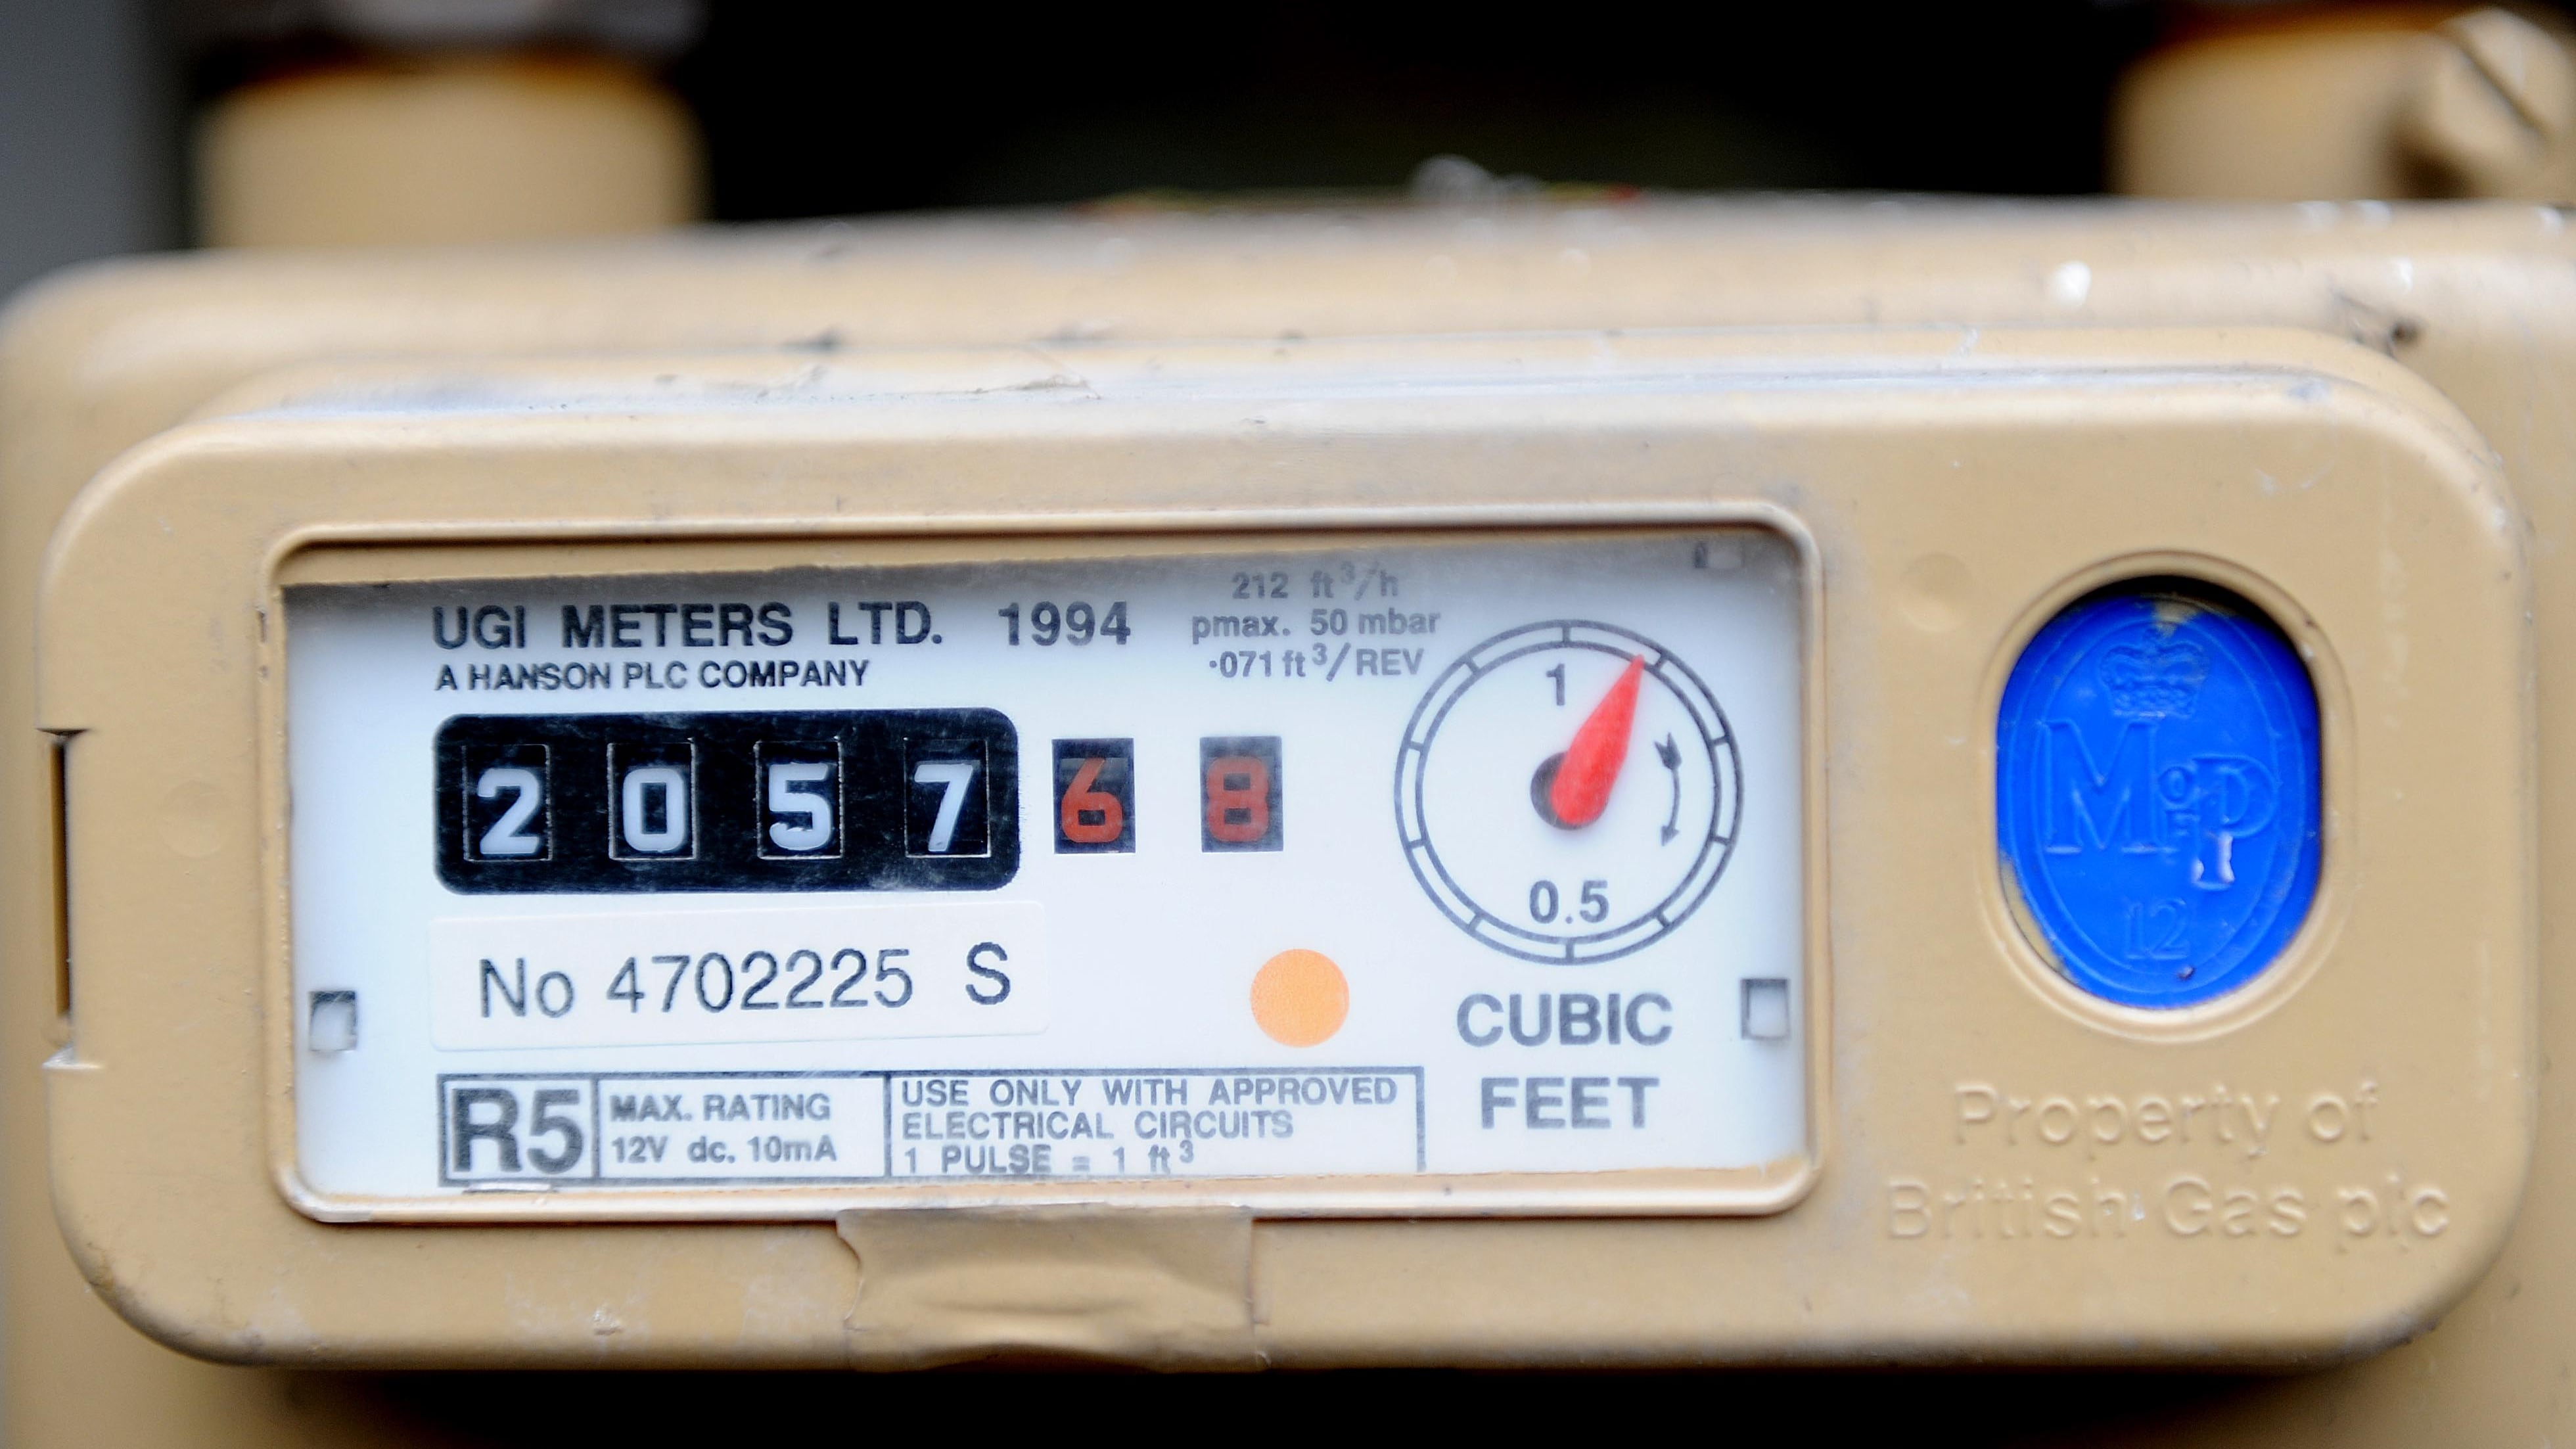 Households have been advised to supply a meter reading as close to July 1 as they can